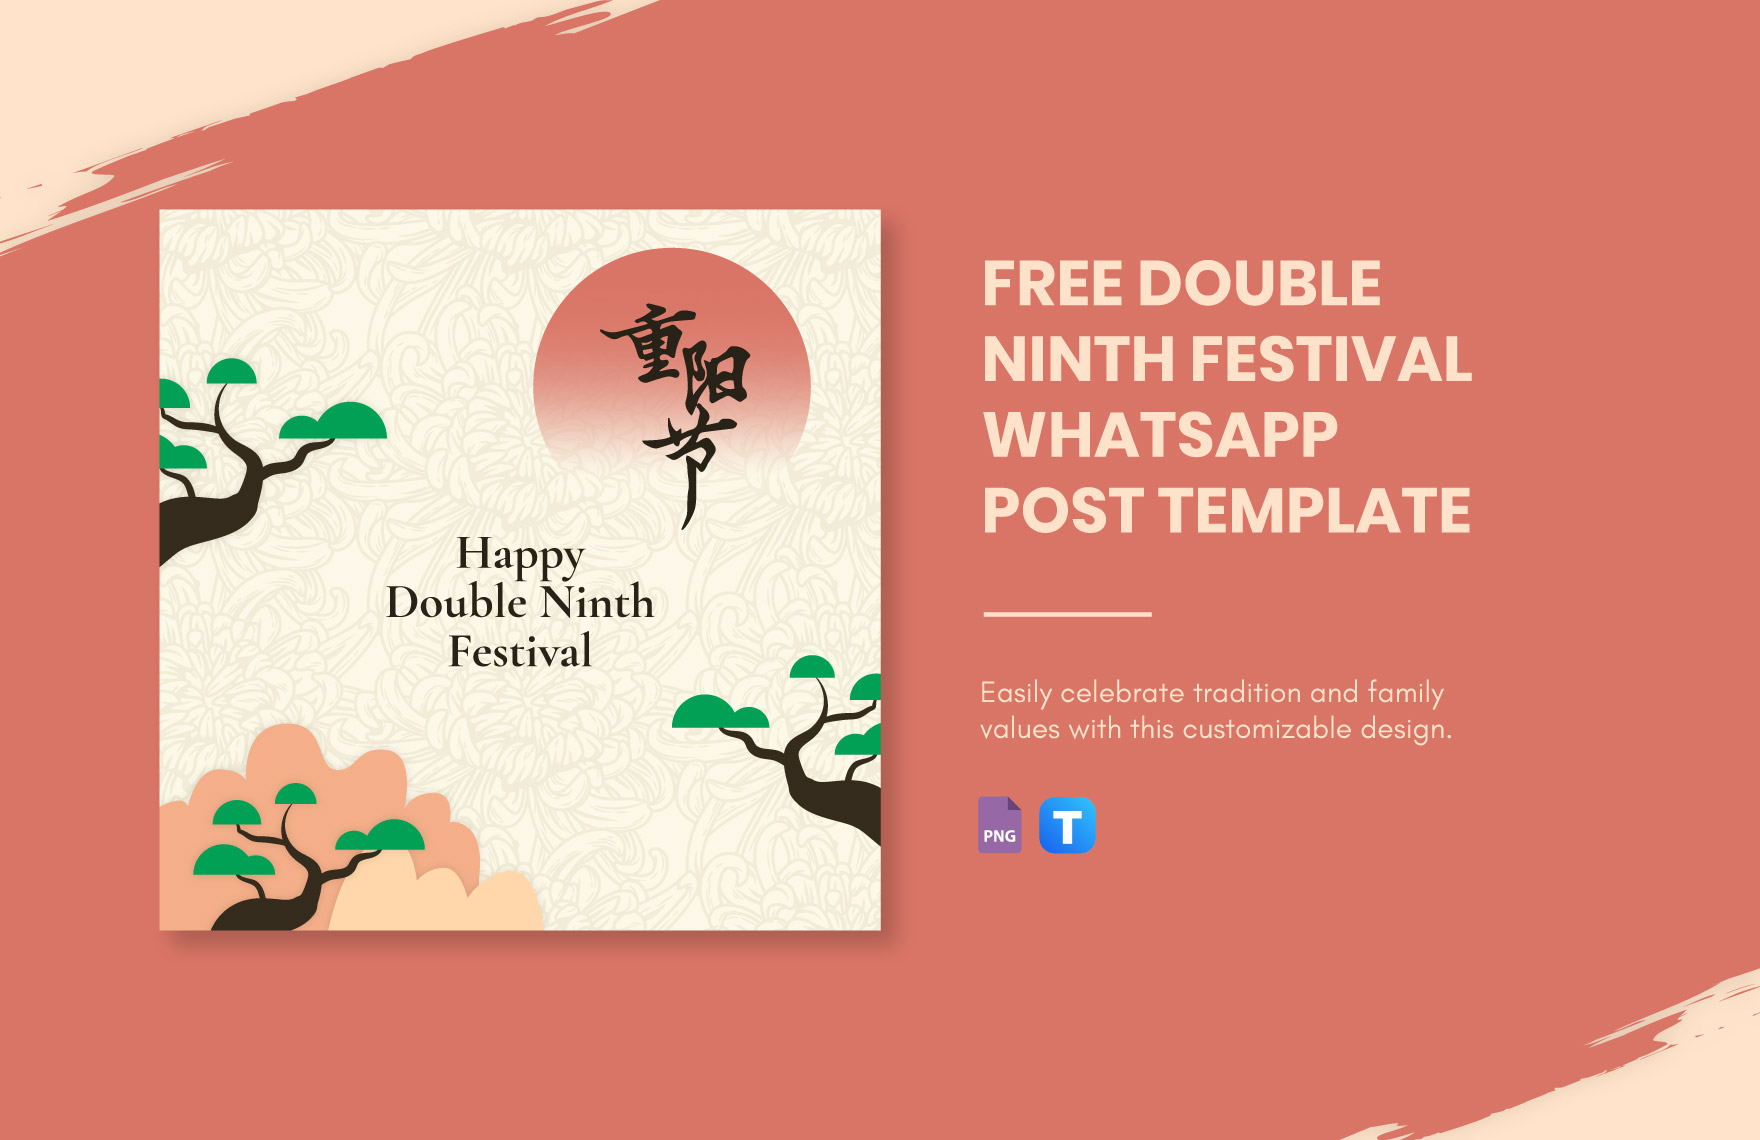 Free Double Ninth Festival WhatsApp Post Template in PNG